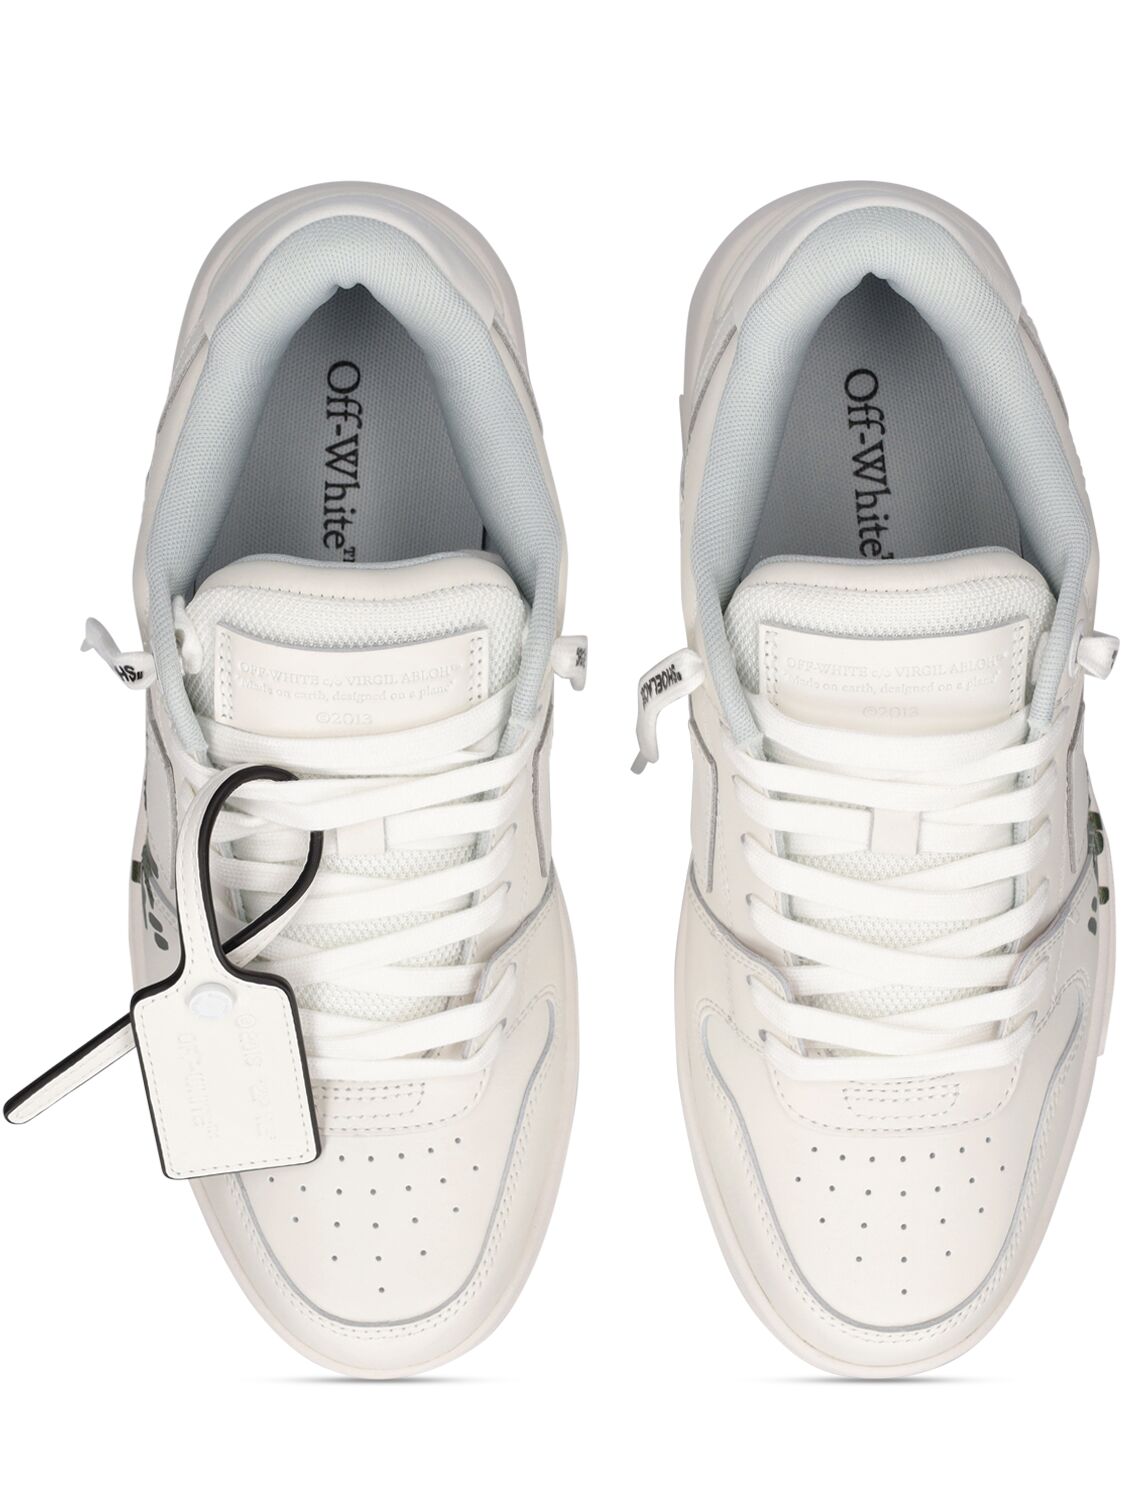 Off-White Sneakers in white/ black